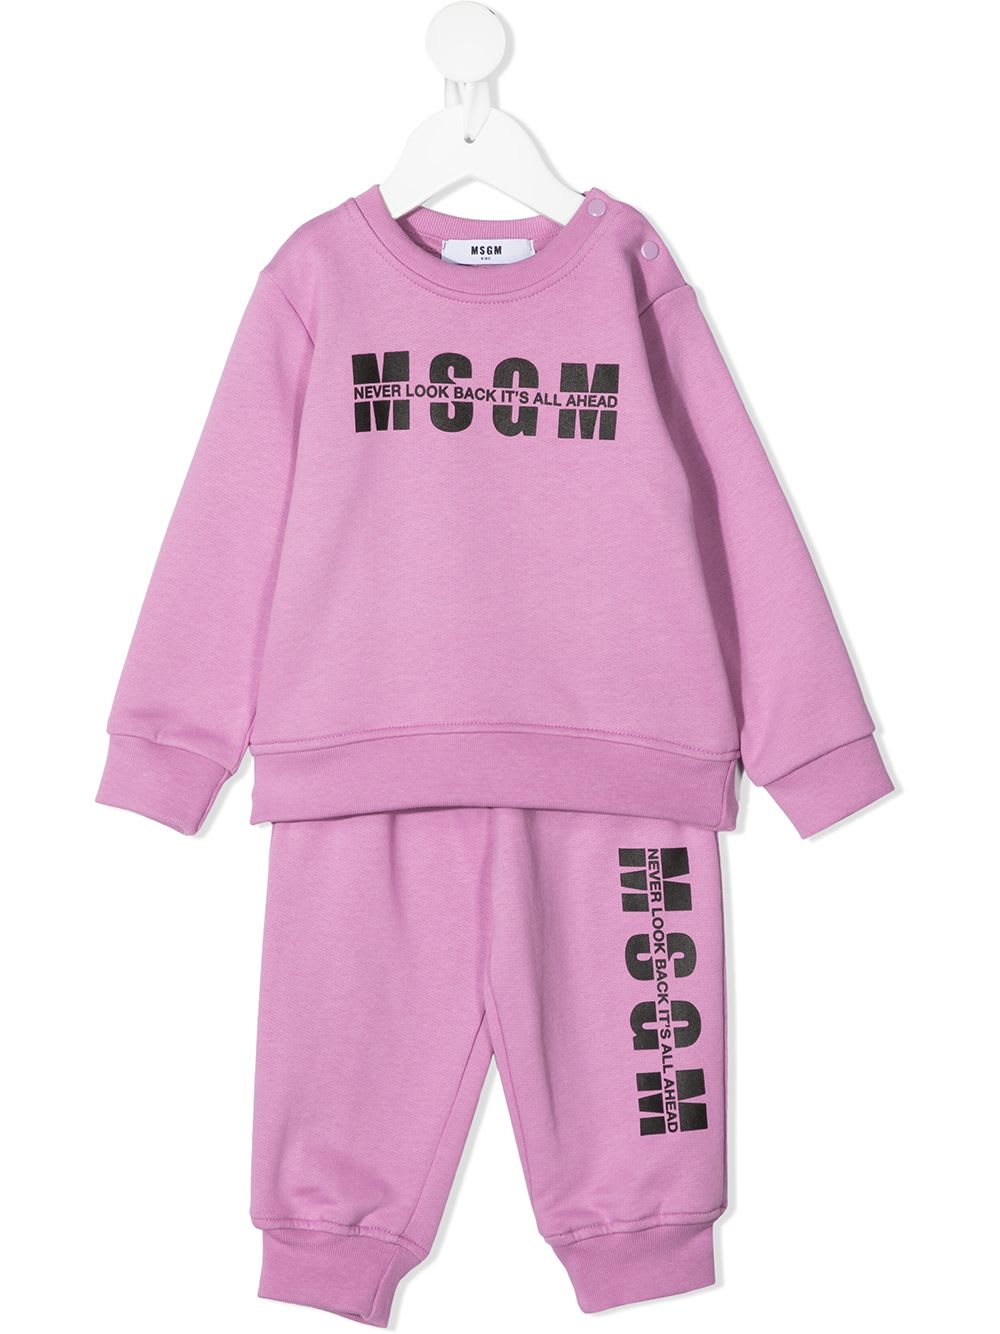 MSGM UNISEX KID LILAC SPORTS SUIT WITH CONTRASTING LOGO AND SLOGAN,11929102